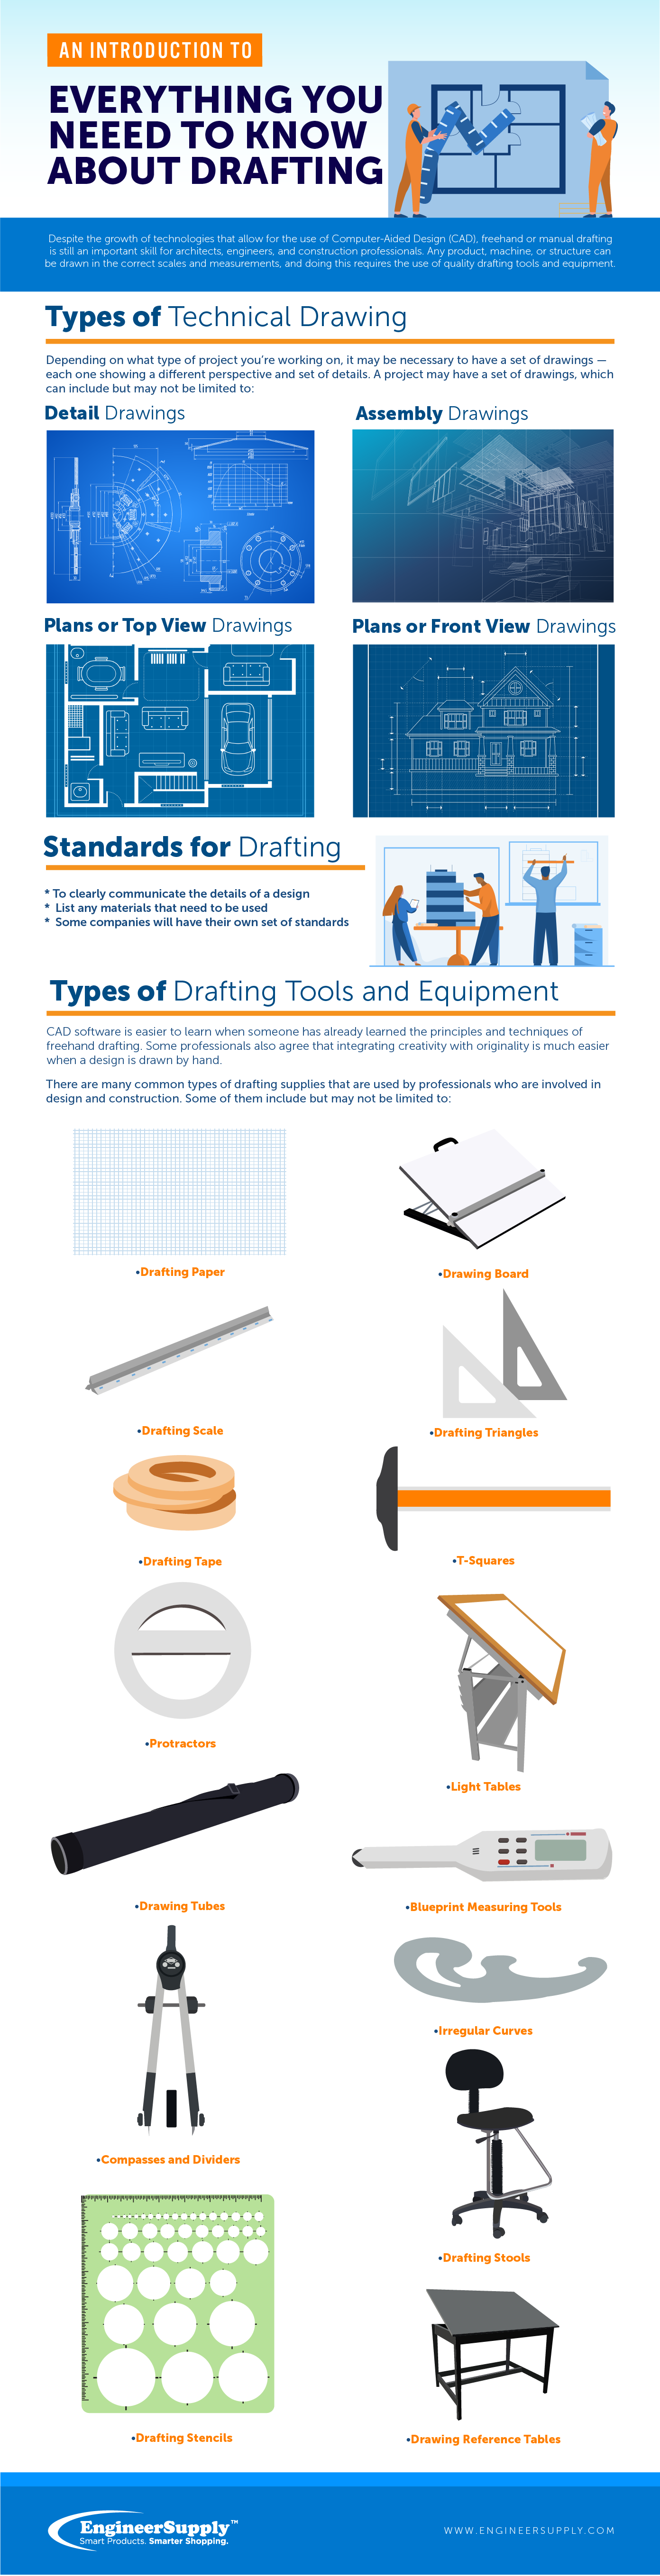 infographic Everything You Need to Know About Drafting